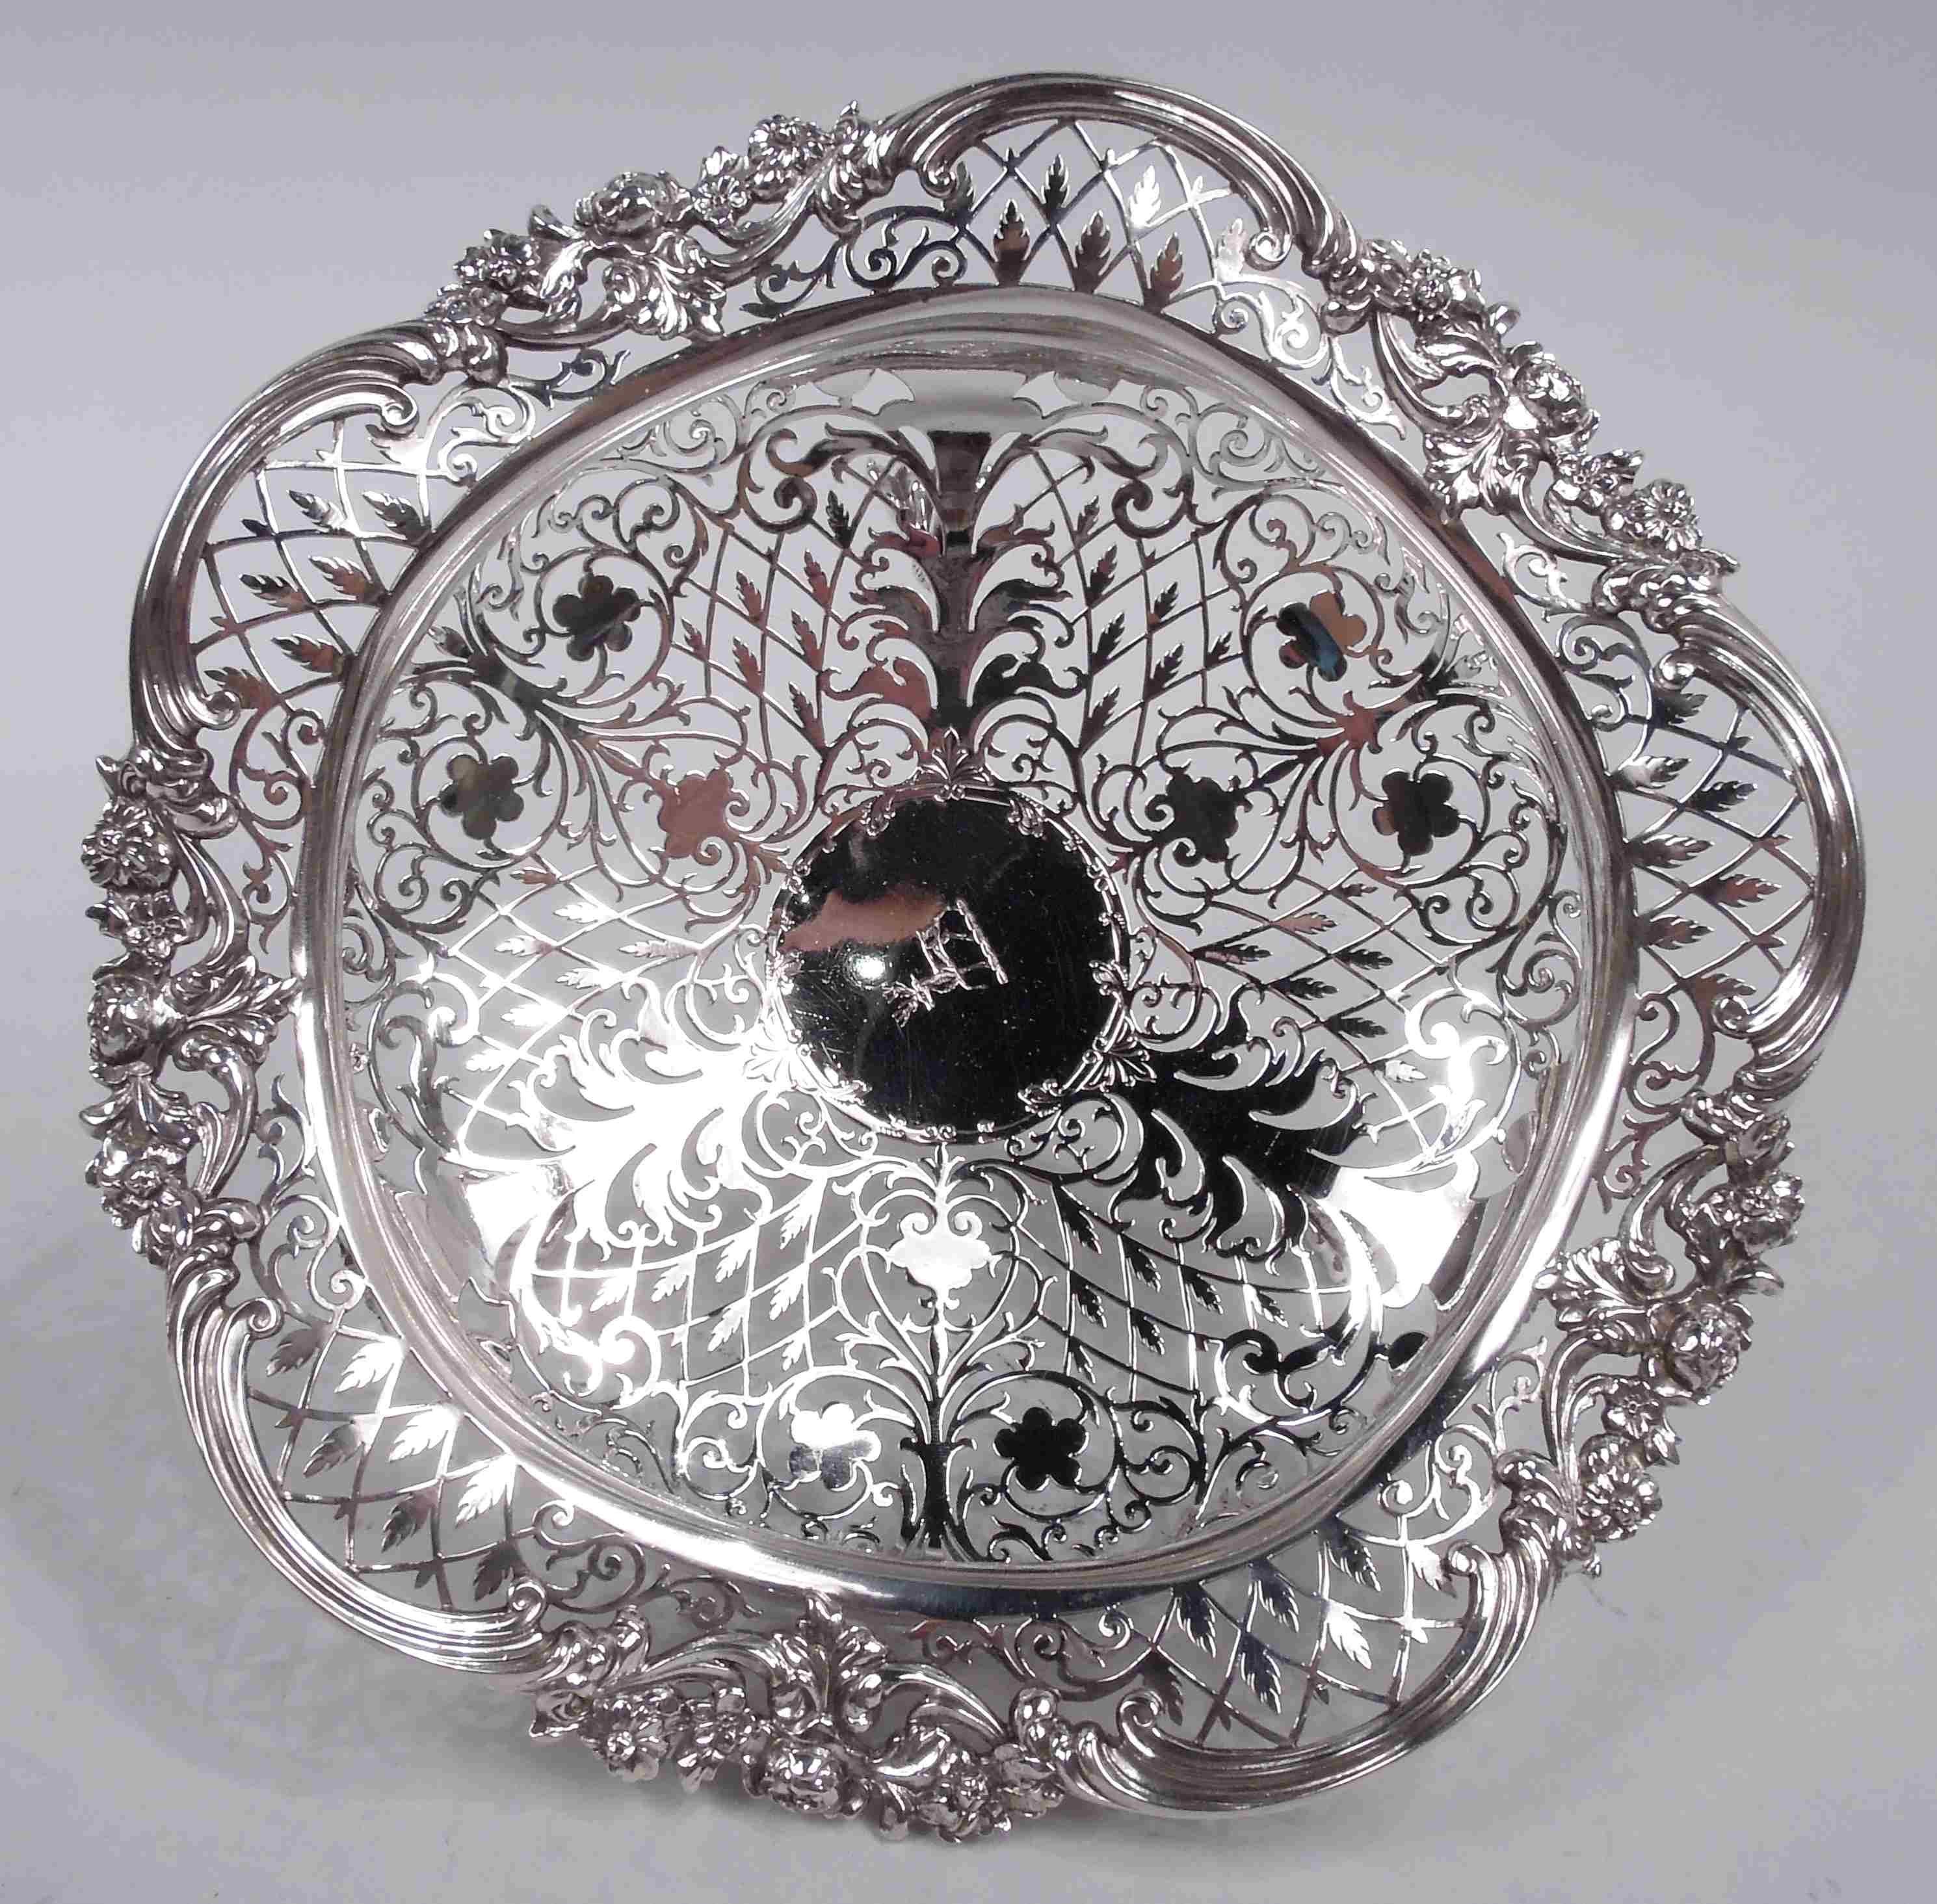 George V sterling silver bowl. Made by Goldsmiths & Silversmiths Co. Ltd in London in 1913. Bellied; rim wavy with applied scrolls and flowers. Three cast split leaf-mounted paw supports. Well has solid central round frame engraved with stag emblem,